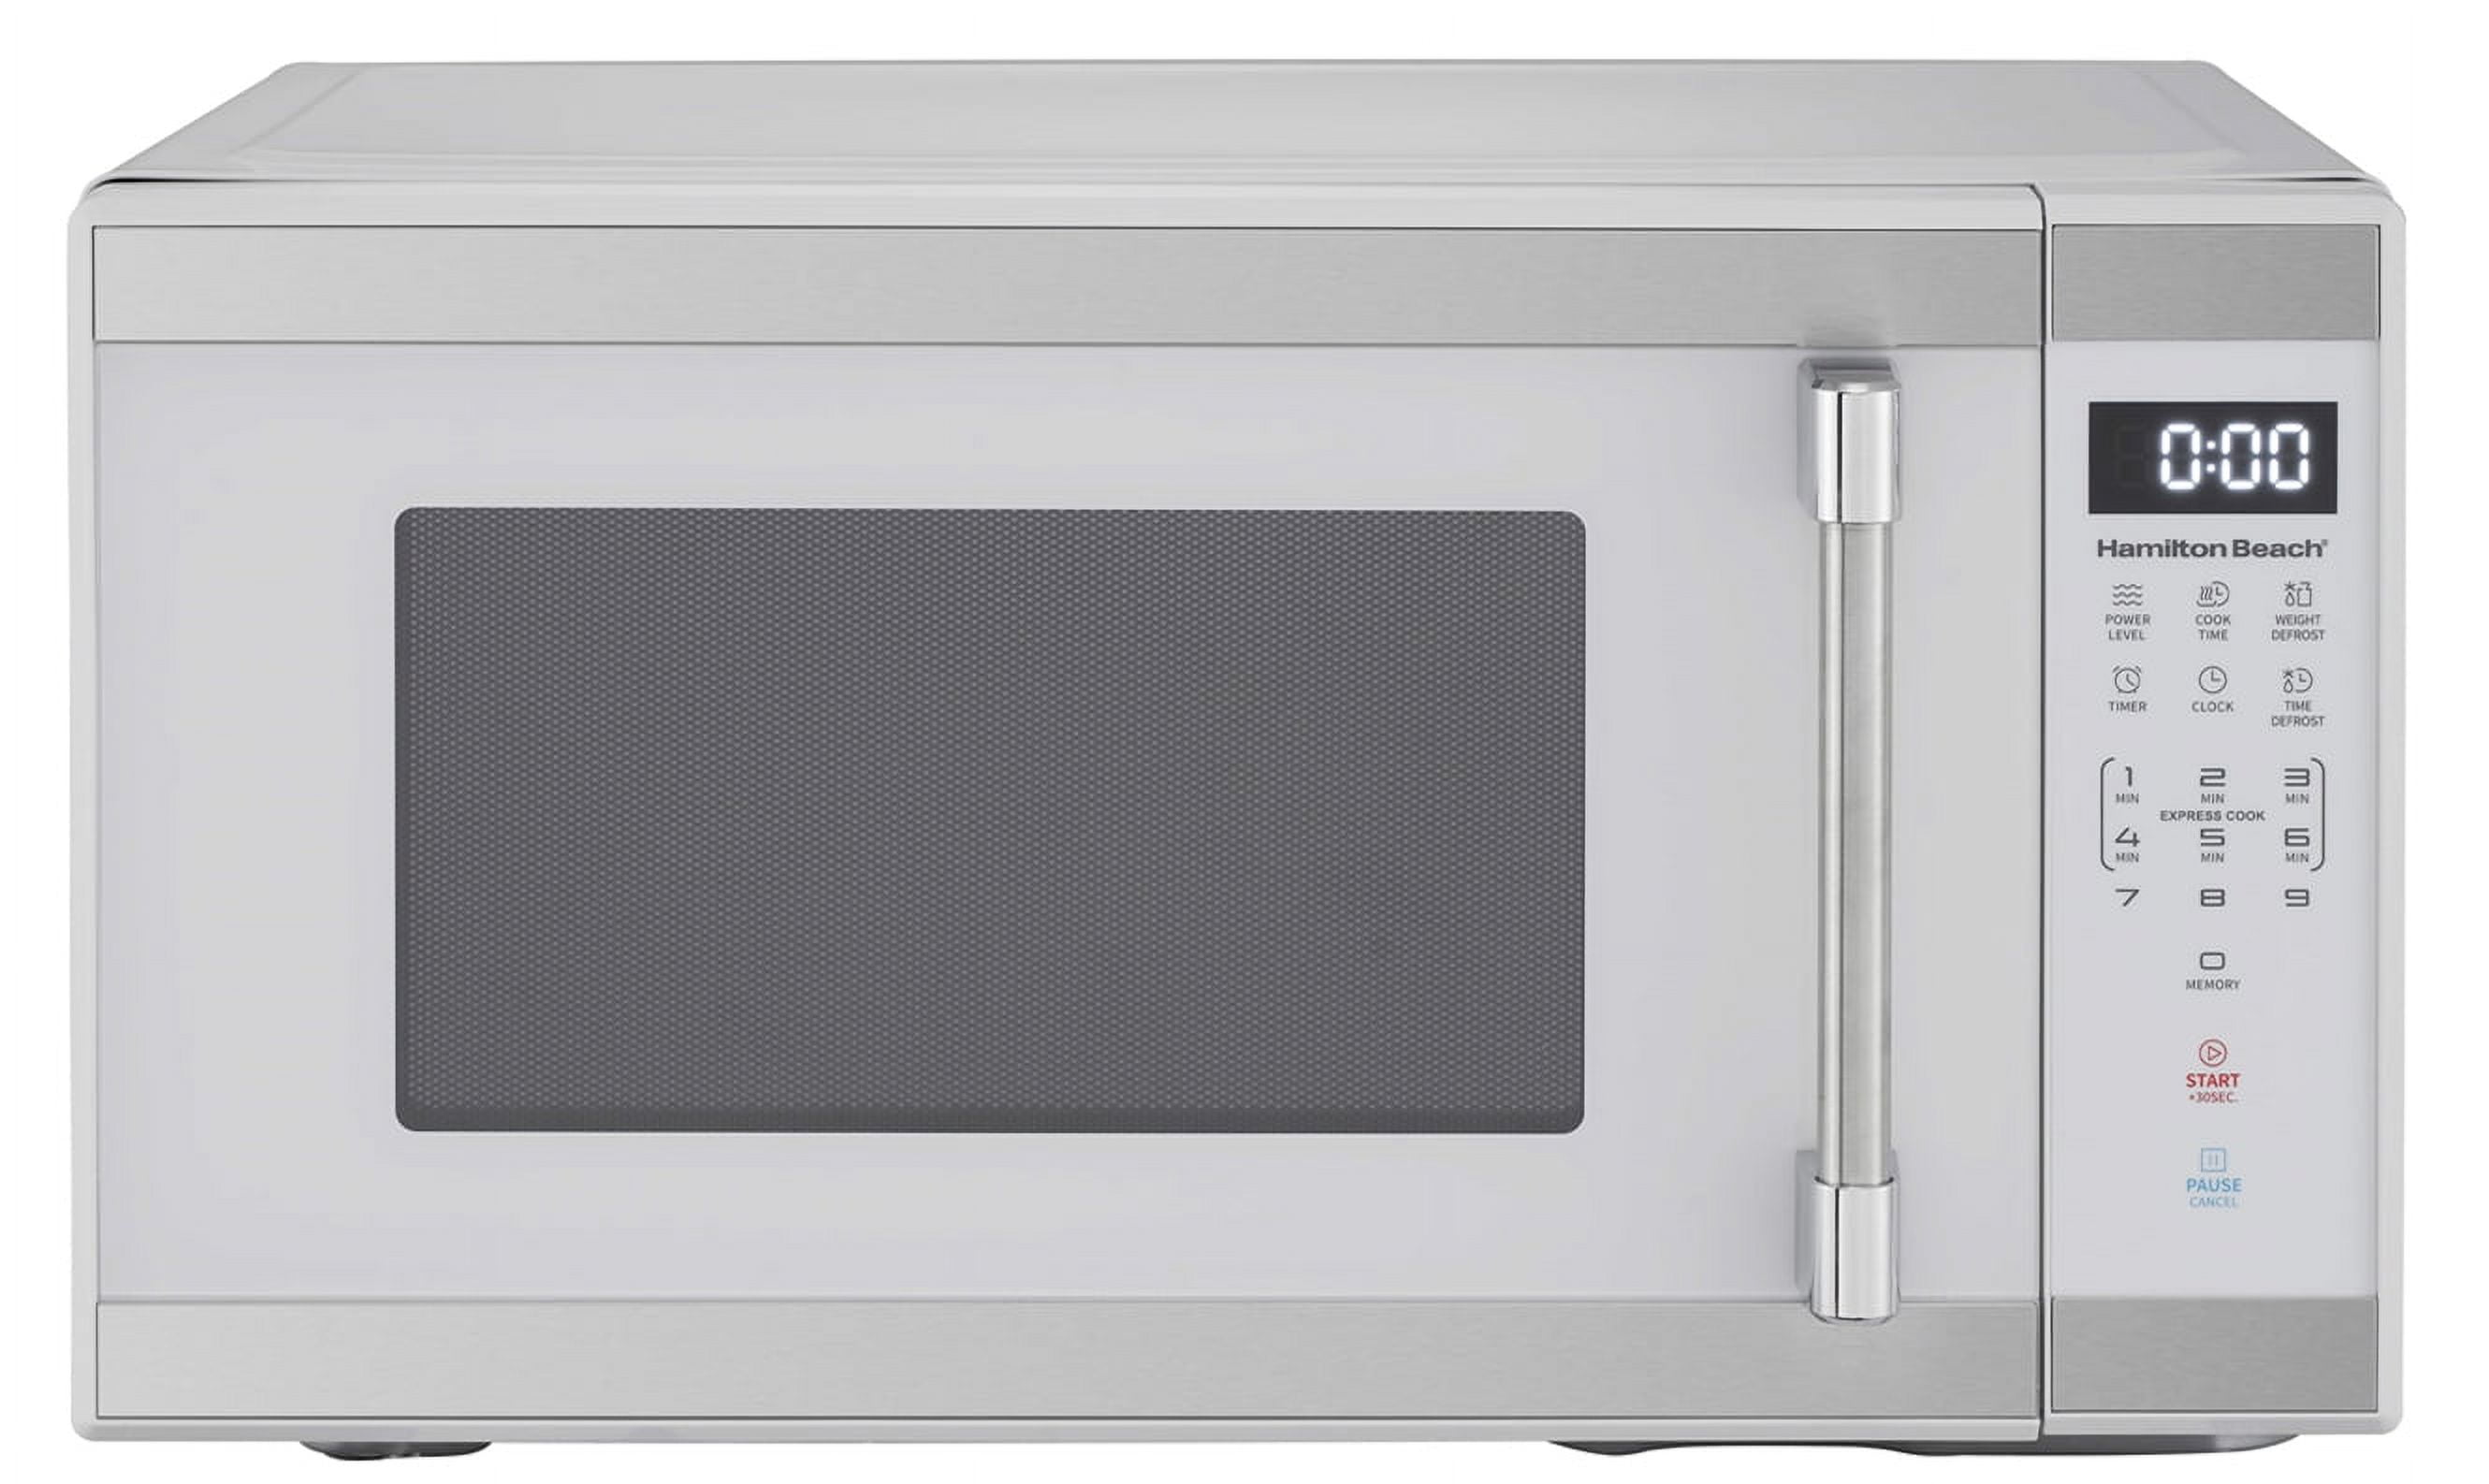 Best Hamilton Beach Microwave for sale in El Paso, Texas for 2024